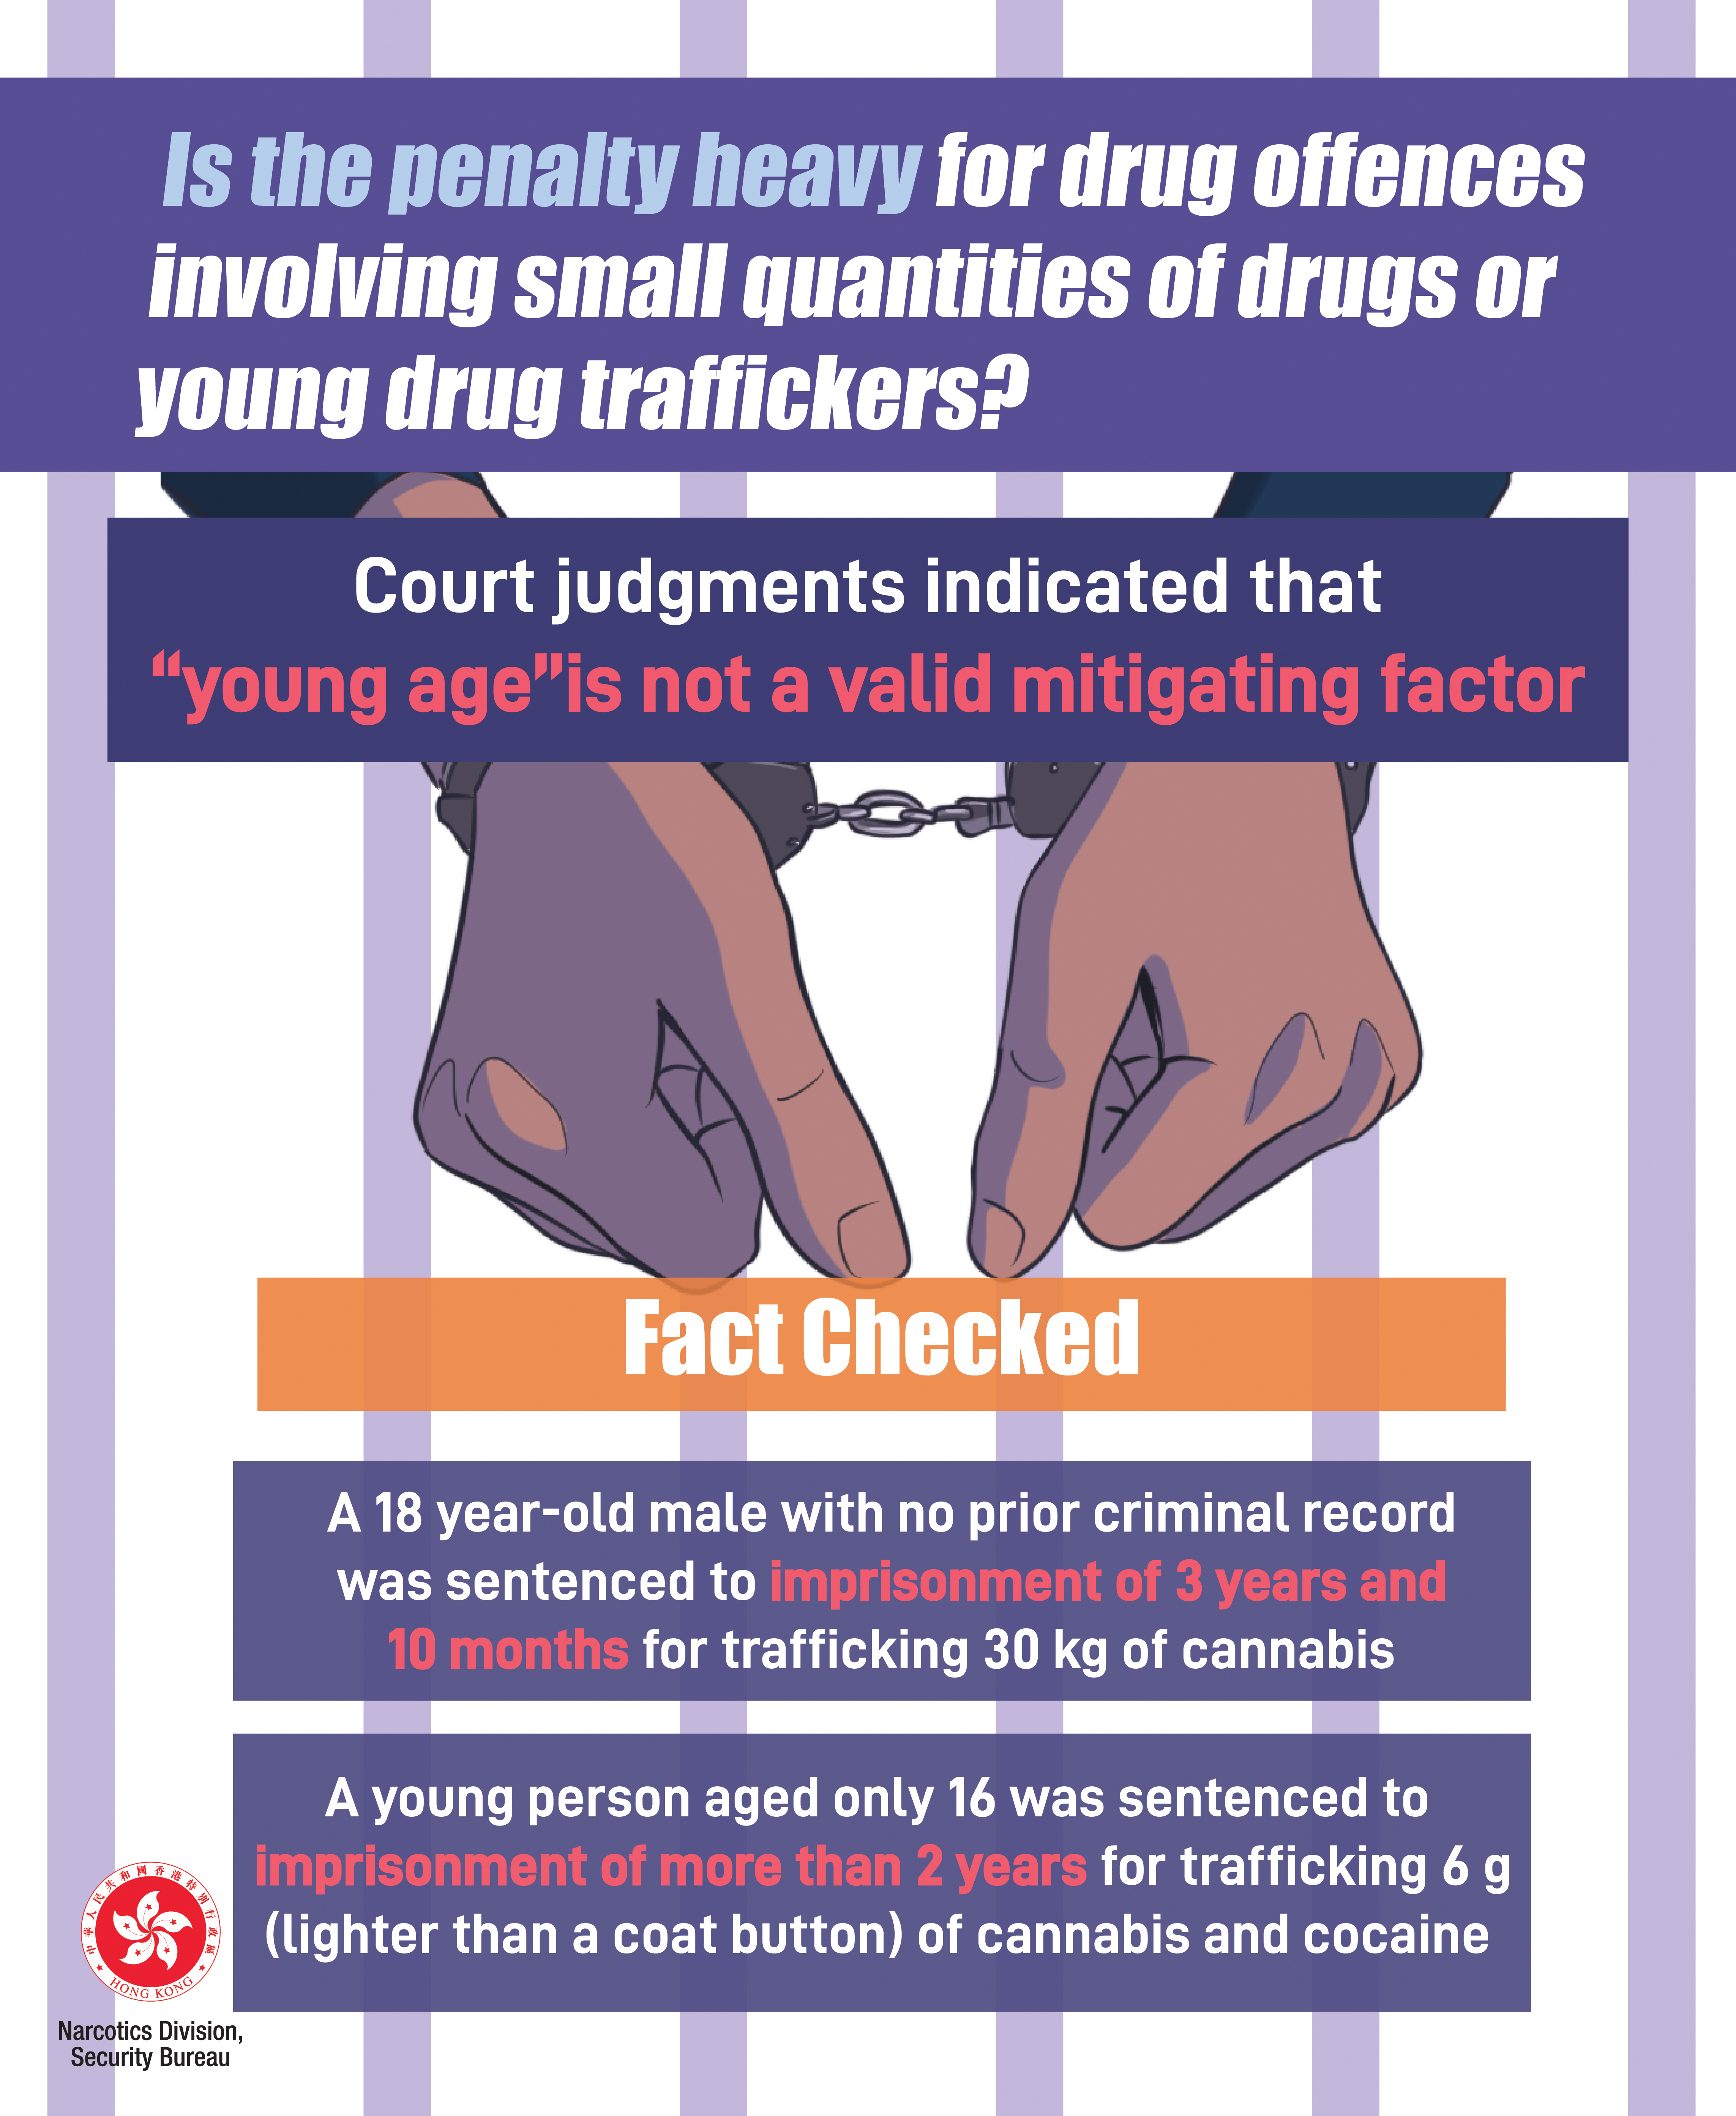 Is the penalty heavy for drug offences involving small quantities of drugs or young drug traffickers?